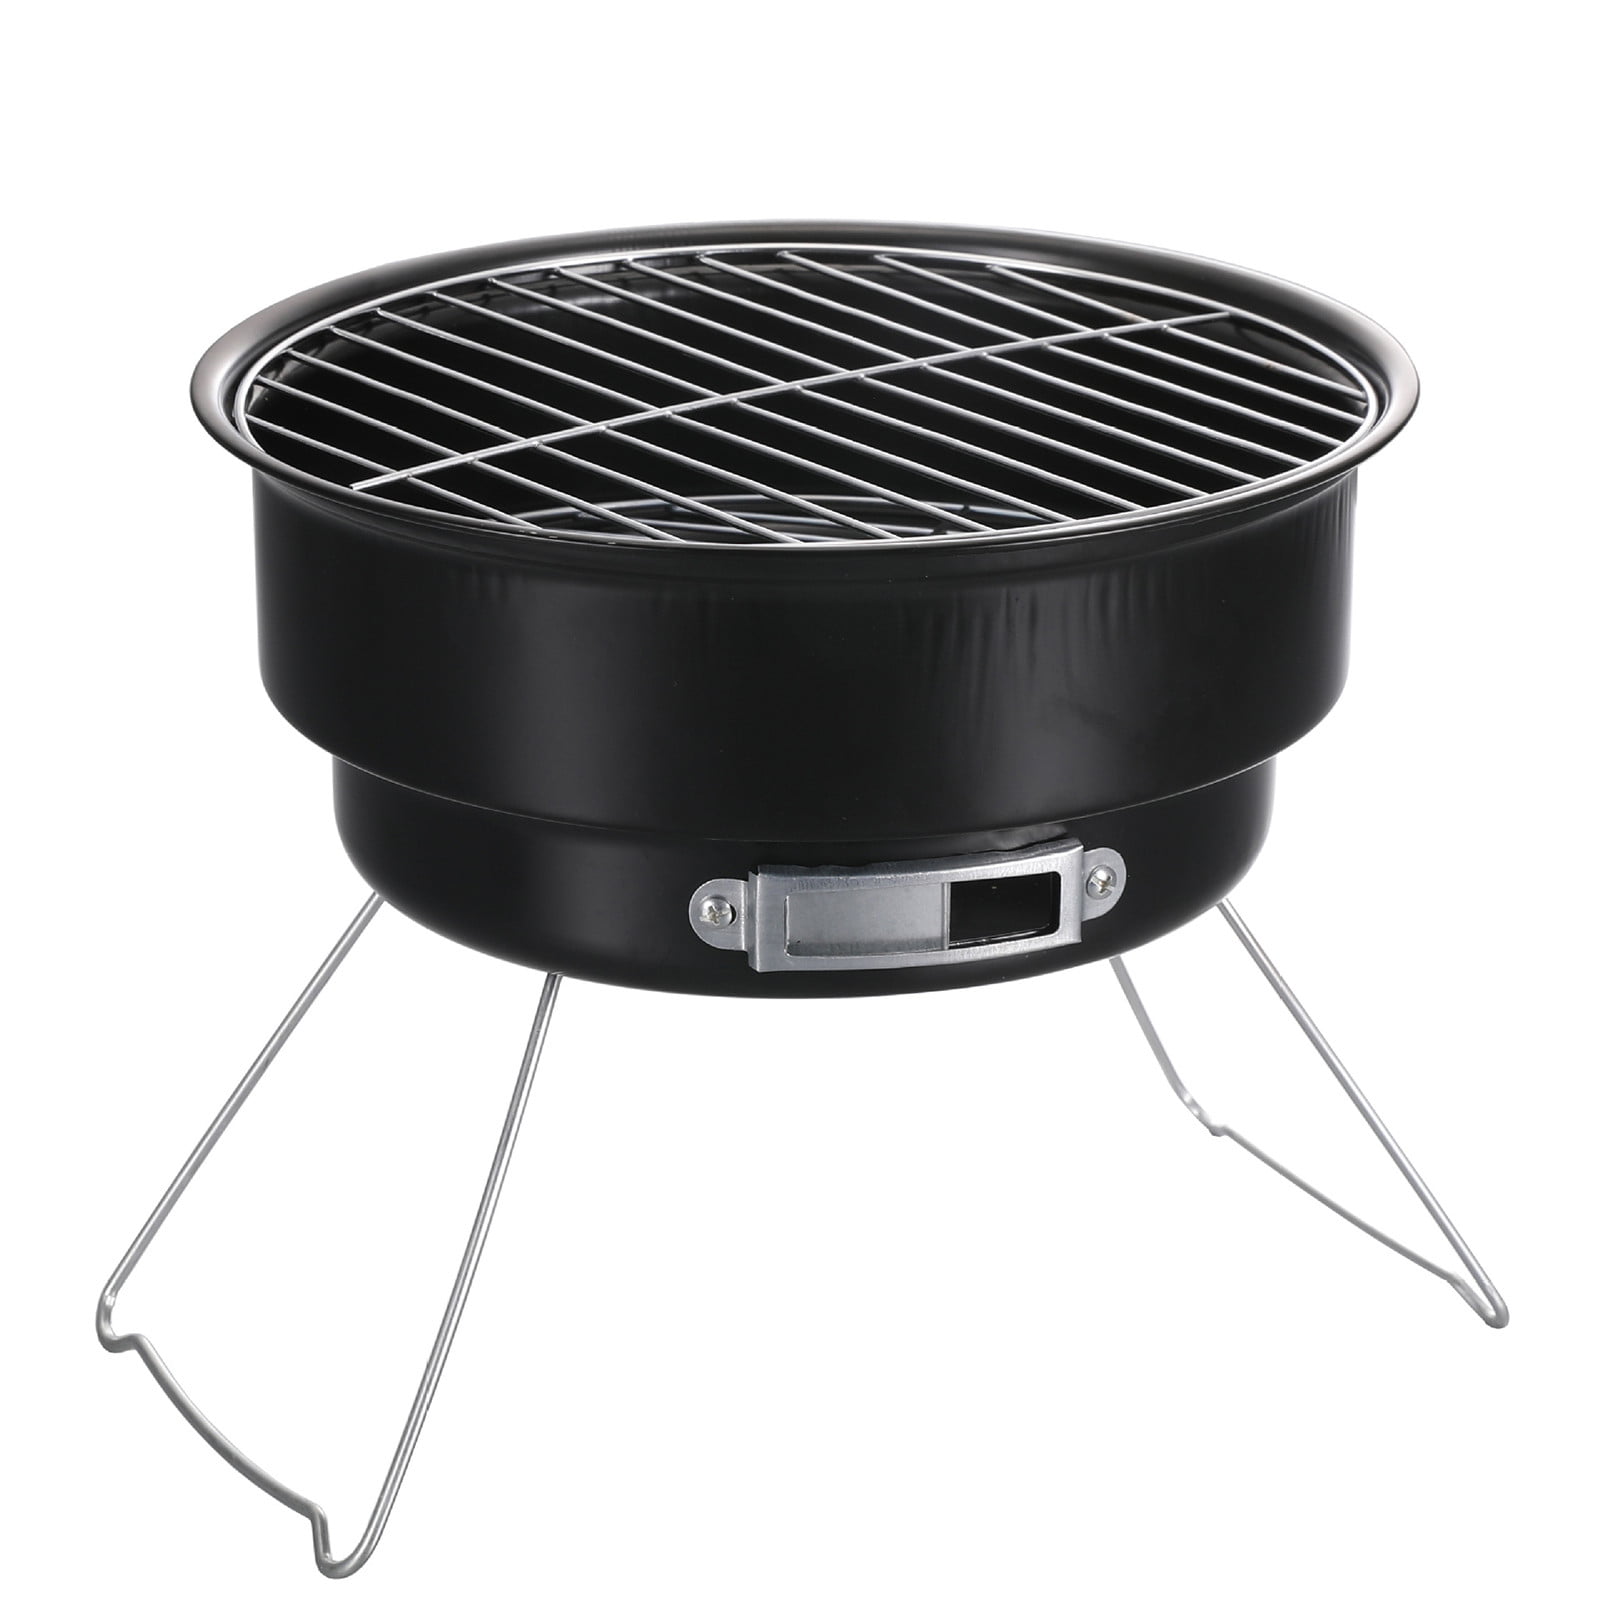 The Seasoned Griller Grill Basket, Stainless Steel basket, BBQ Accessories,  Meats, Vegetables, Seafood, Pizza, Kabob. Fits Charcoal, Gas Grills —  Seasoned Griller